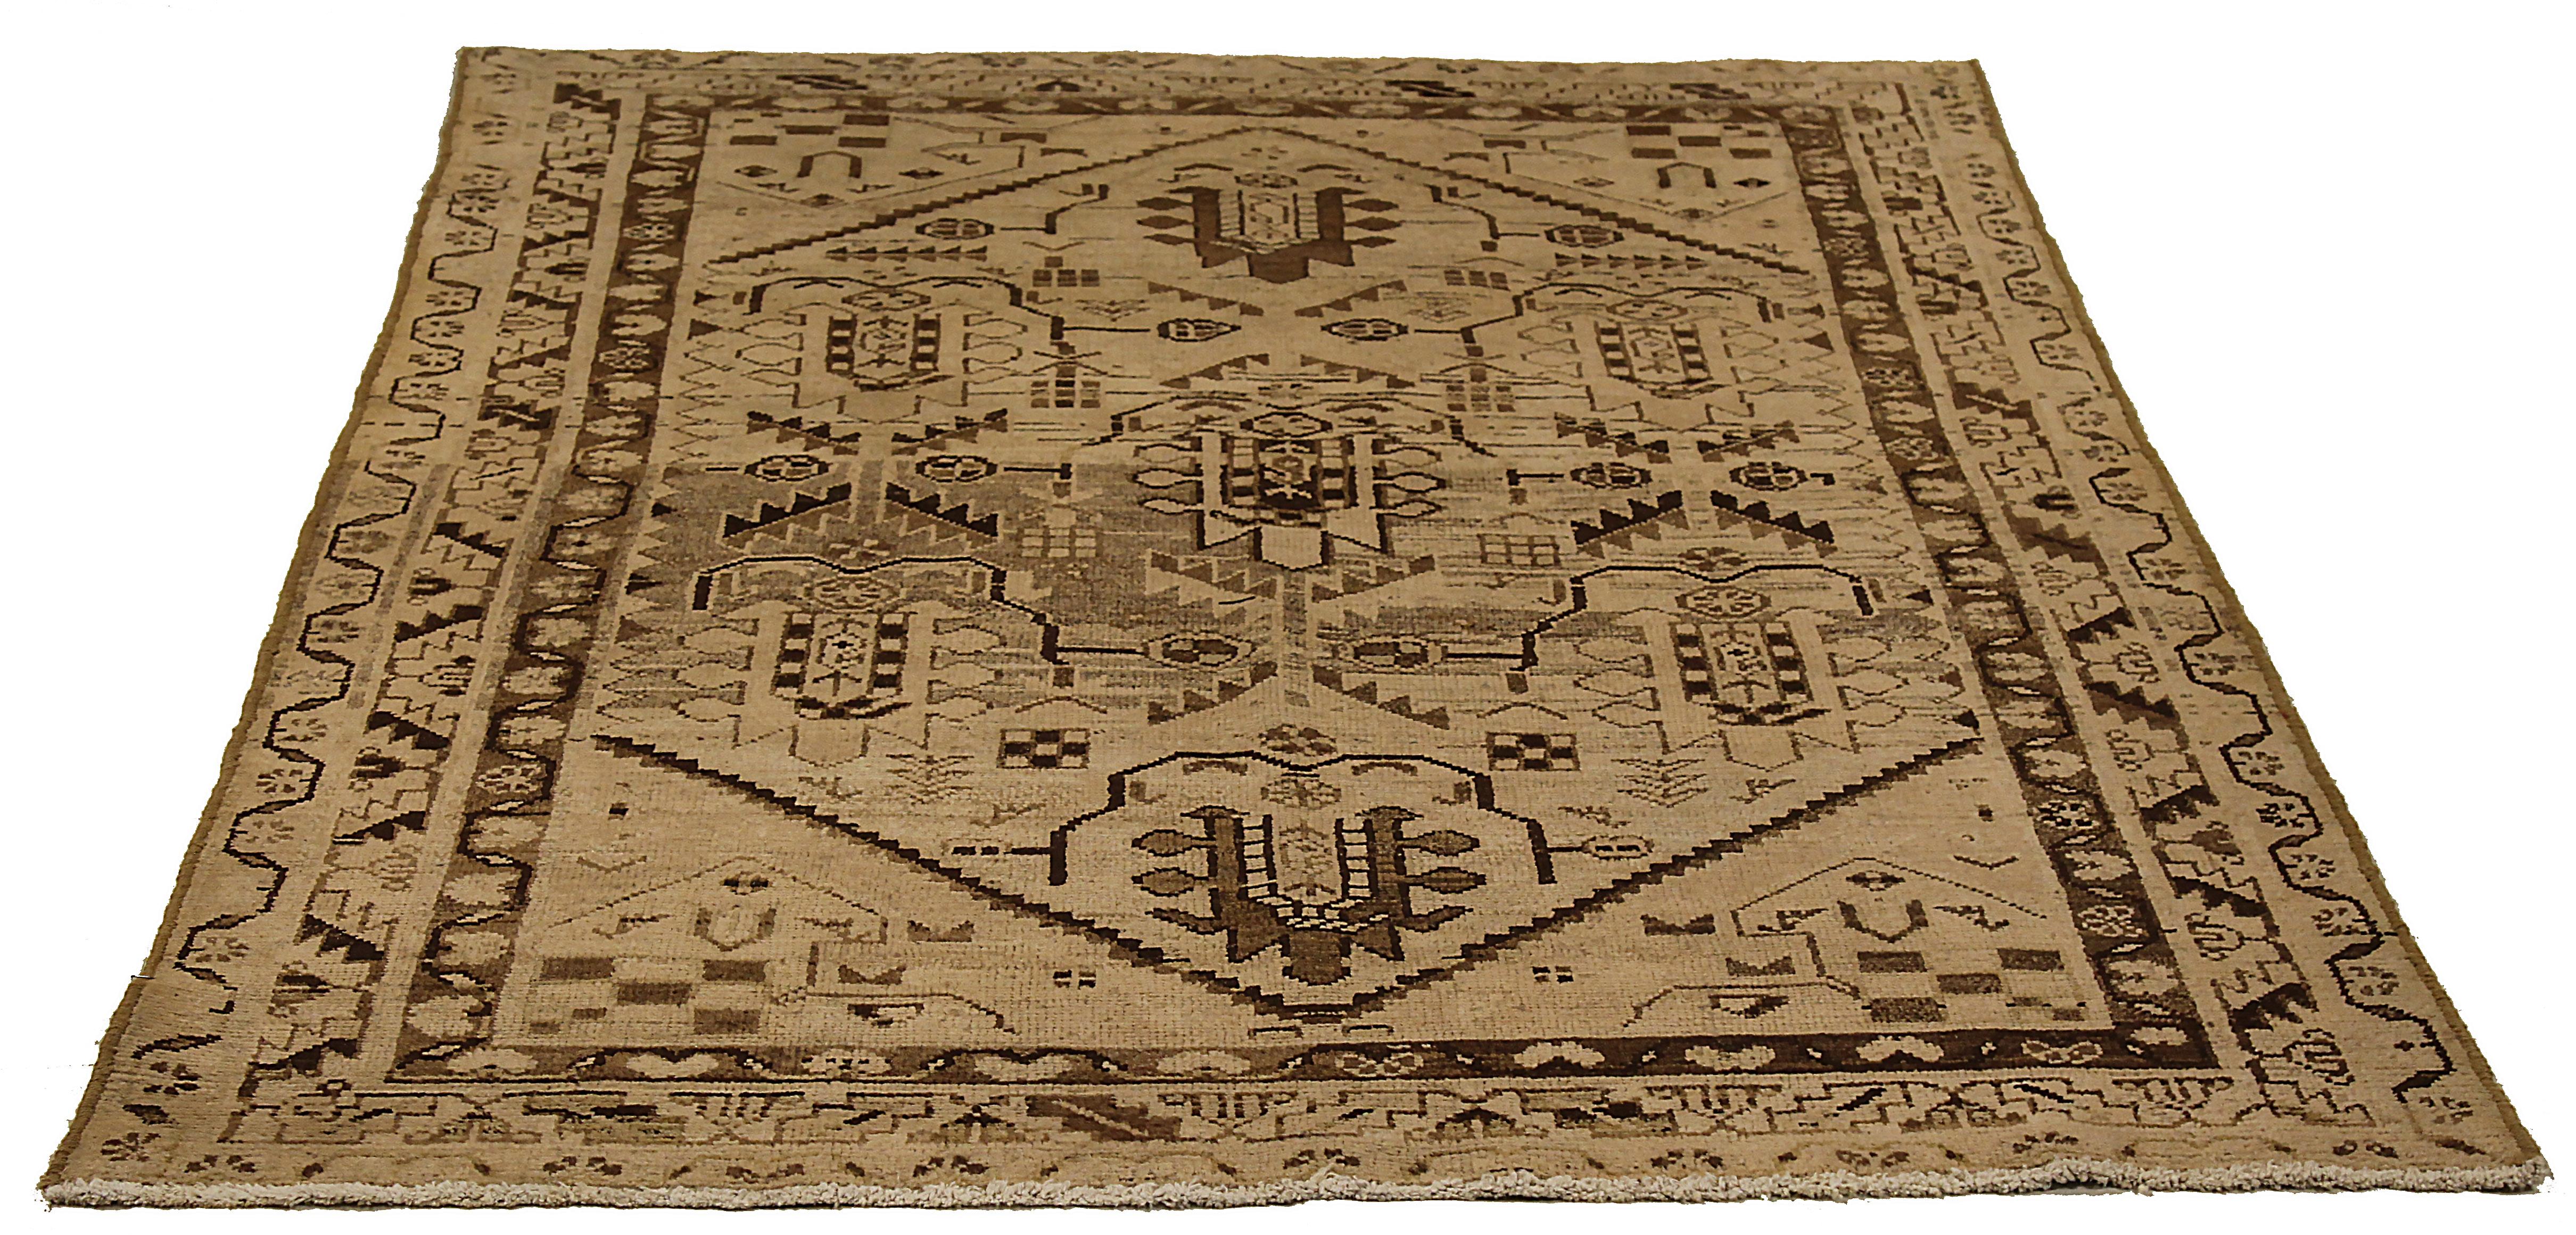 Antique Persian rug handwoven from the finest sheep’s wool. It’s colored with all-natural vegetable dyes that are safe for humans and pets. It’s a traditional Malayer design featuring floral details on an ivory field. It’s a lovely piece to showcase